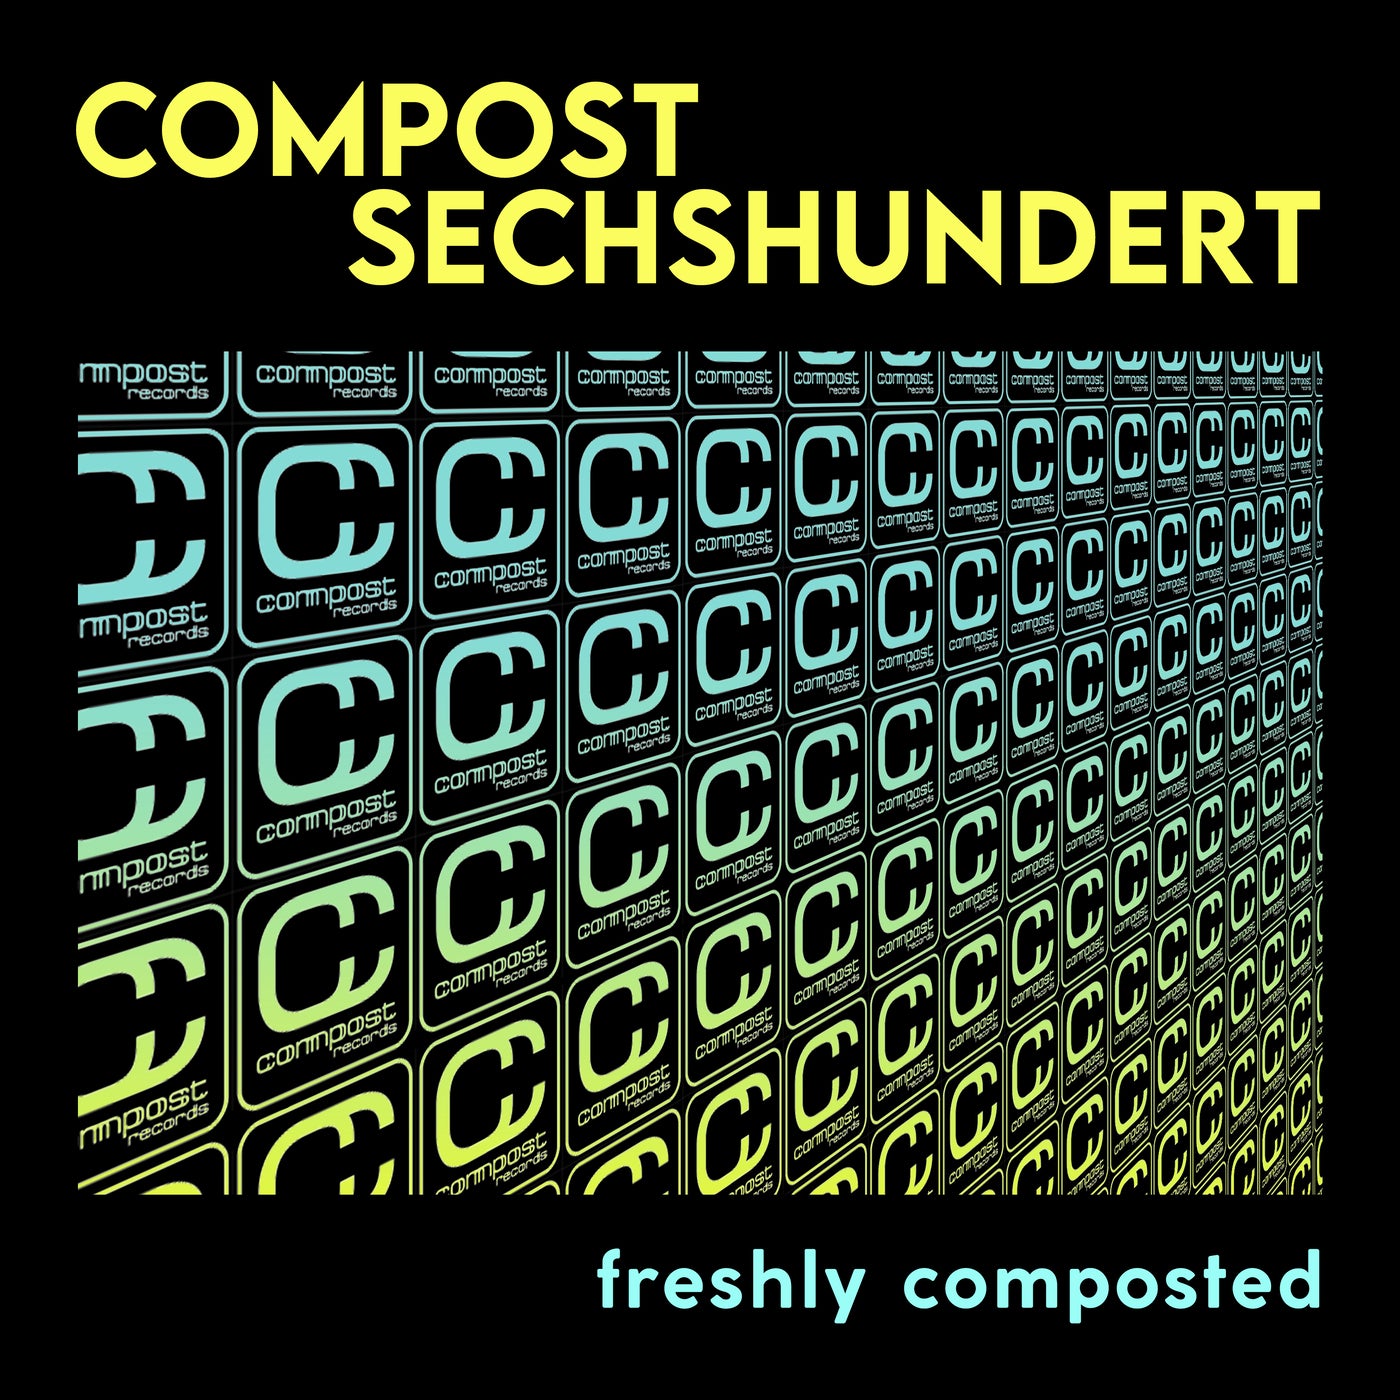 Download Compost Sechshundert - Freshly Composted on Electrobuzz